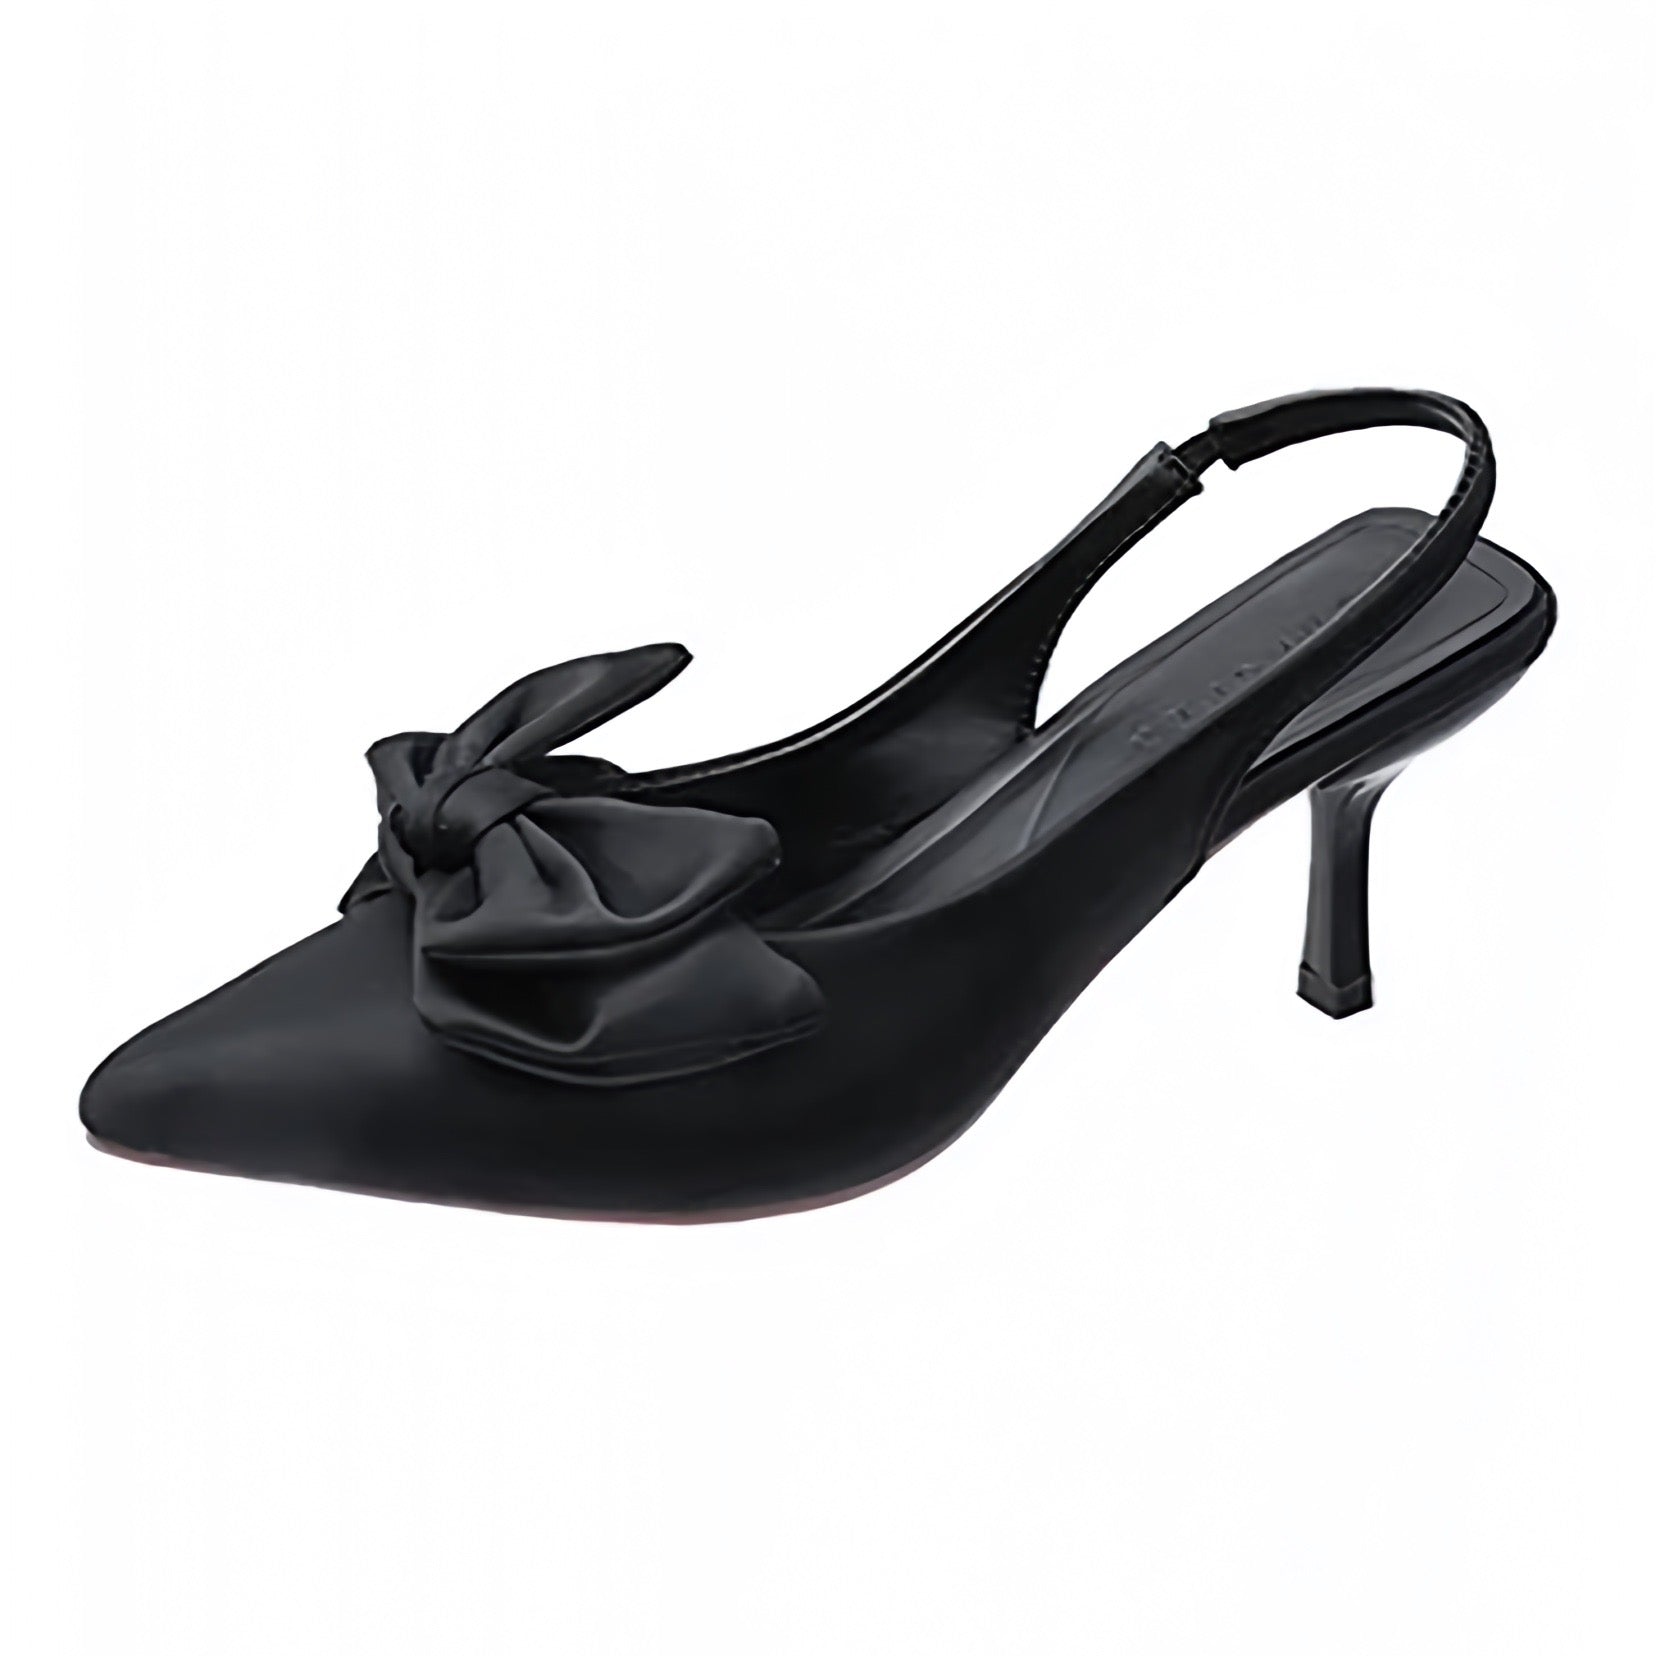 black-slim-fit-slingback-strappy-medium-mid-high-heel-vegan-faux-leather-bow-pointy-toe-kitten-silhouette-sandals-high-heels-pumps-shoes-women-ladies-chic-trendy-spring-2024-summer-elegant-classy-classic-feminine-coquette-semi-formal-casual-vintage-gala-prom-hoco-homecoming-date-night-out-evening-cocktail-party-sexy-vacation-old-money-quiet-luxury-90s-minimalist-minimalism-office-siren-revolve-dolce-vita-dupe